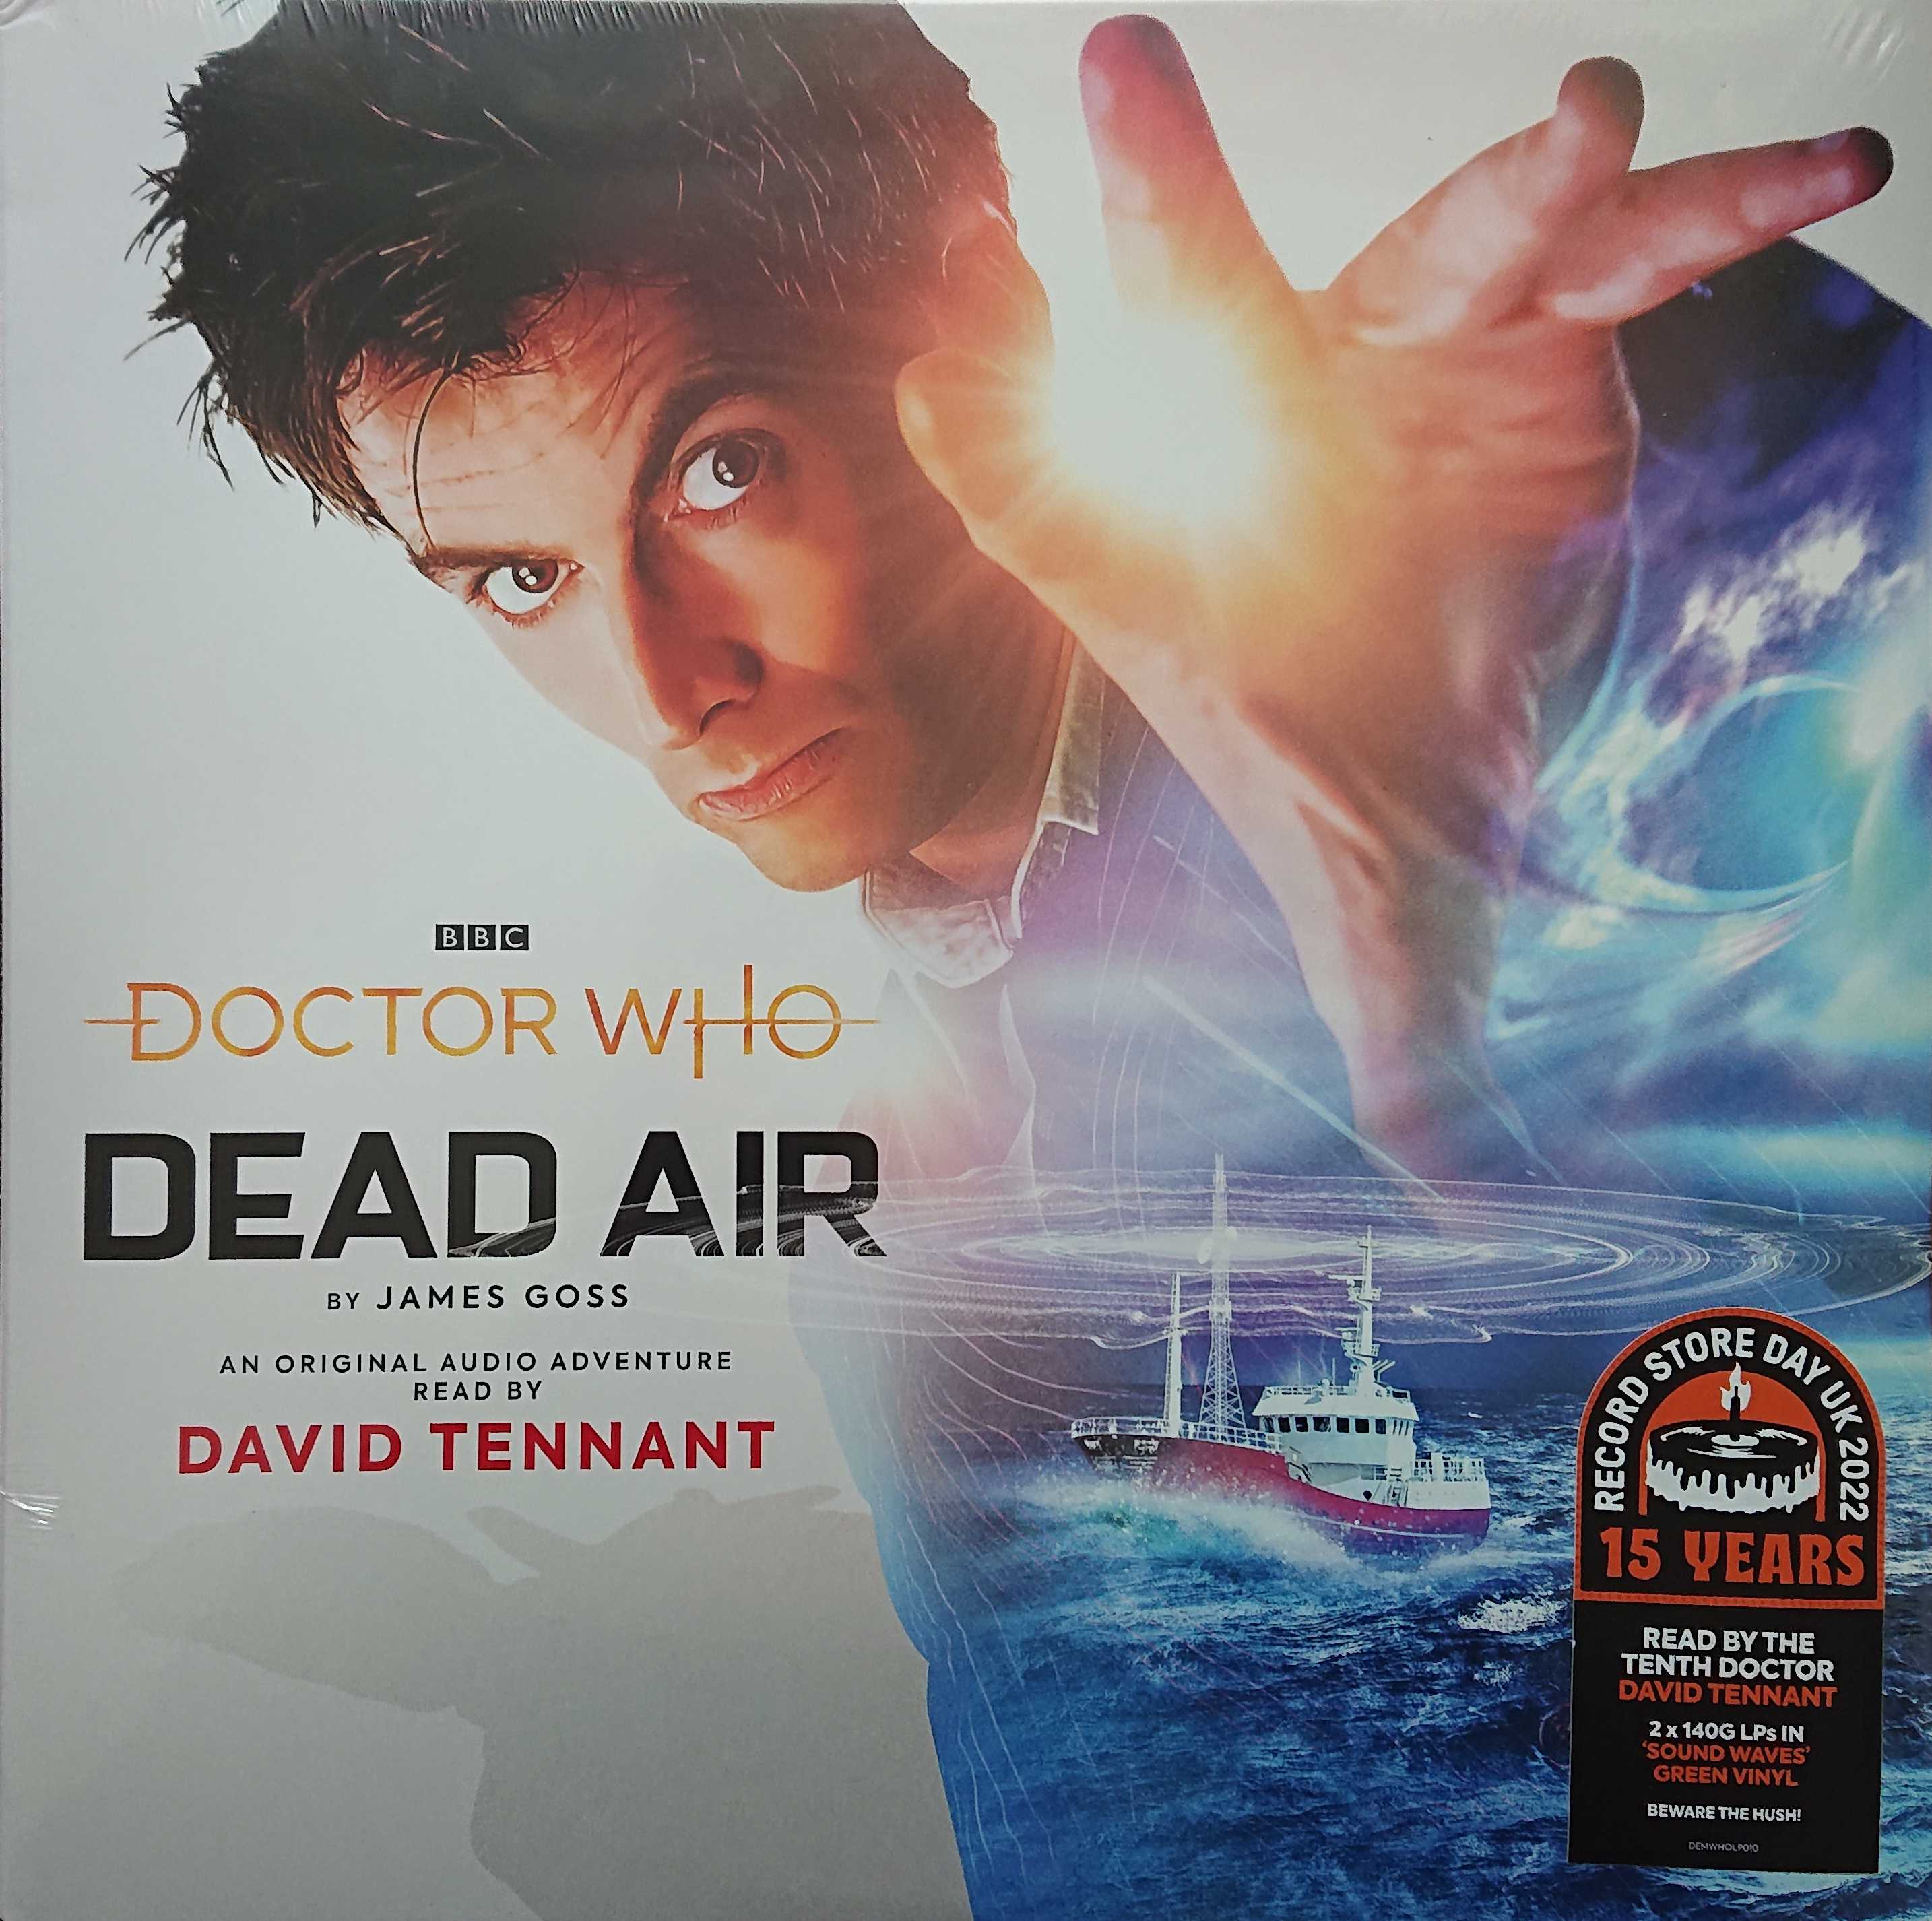 Picture of DEMWHOLP010 Doctor Who - Dead air - Record Store Day 2022 by artist James Goss from the BBC records and Tapes library